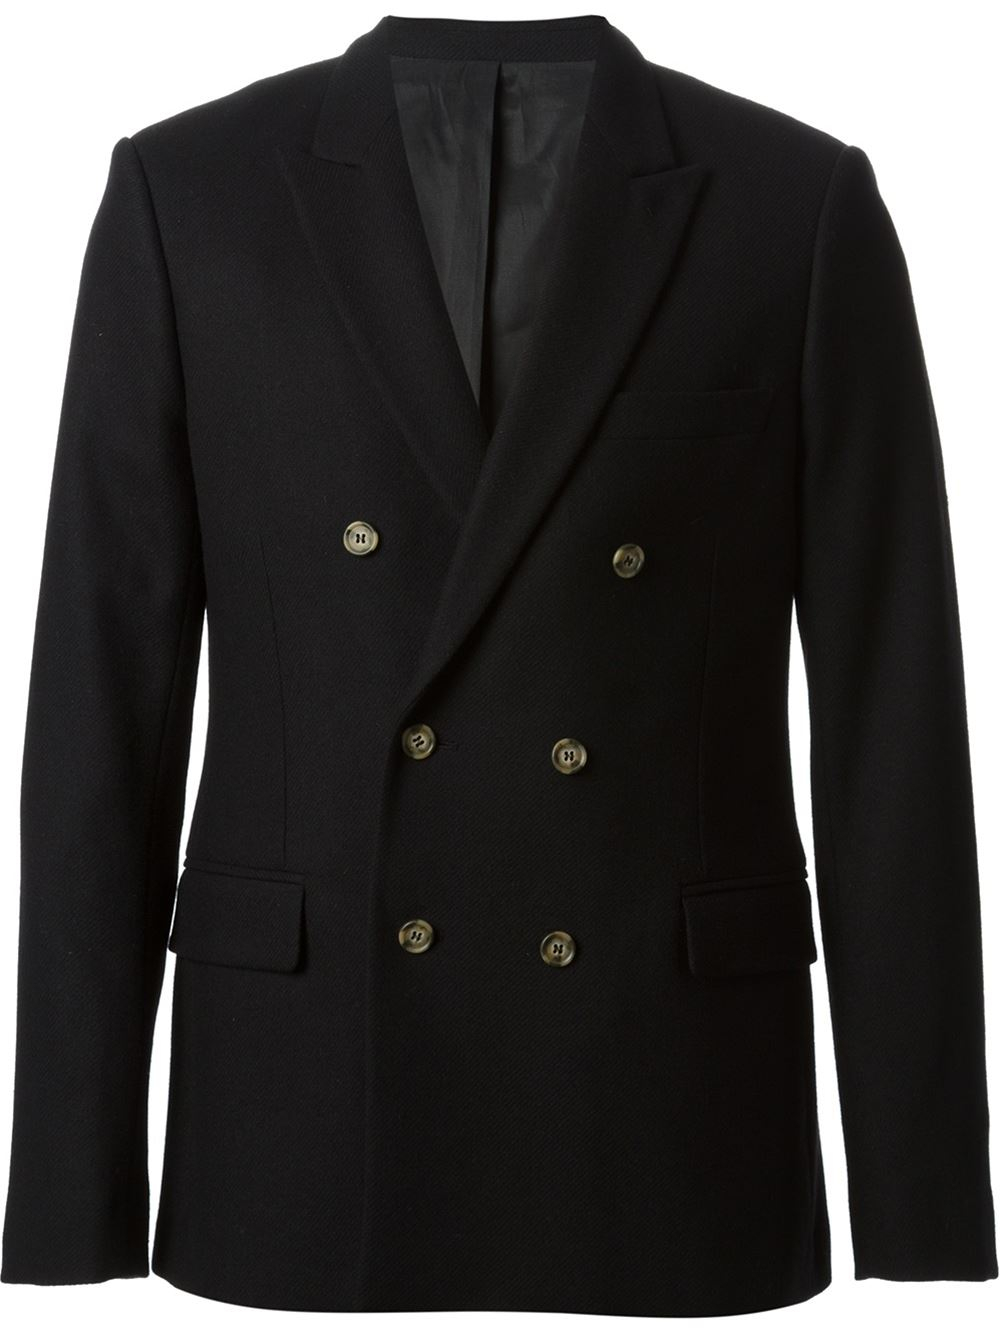 AMI Double Breasted Blazer in Black for Men - Lyst